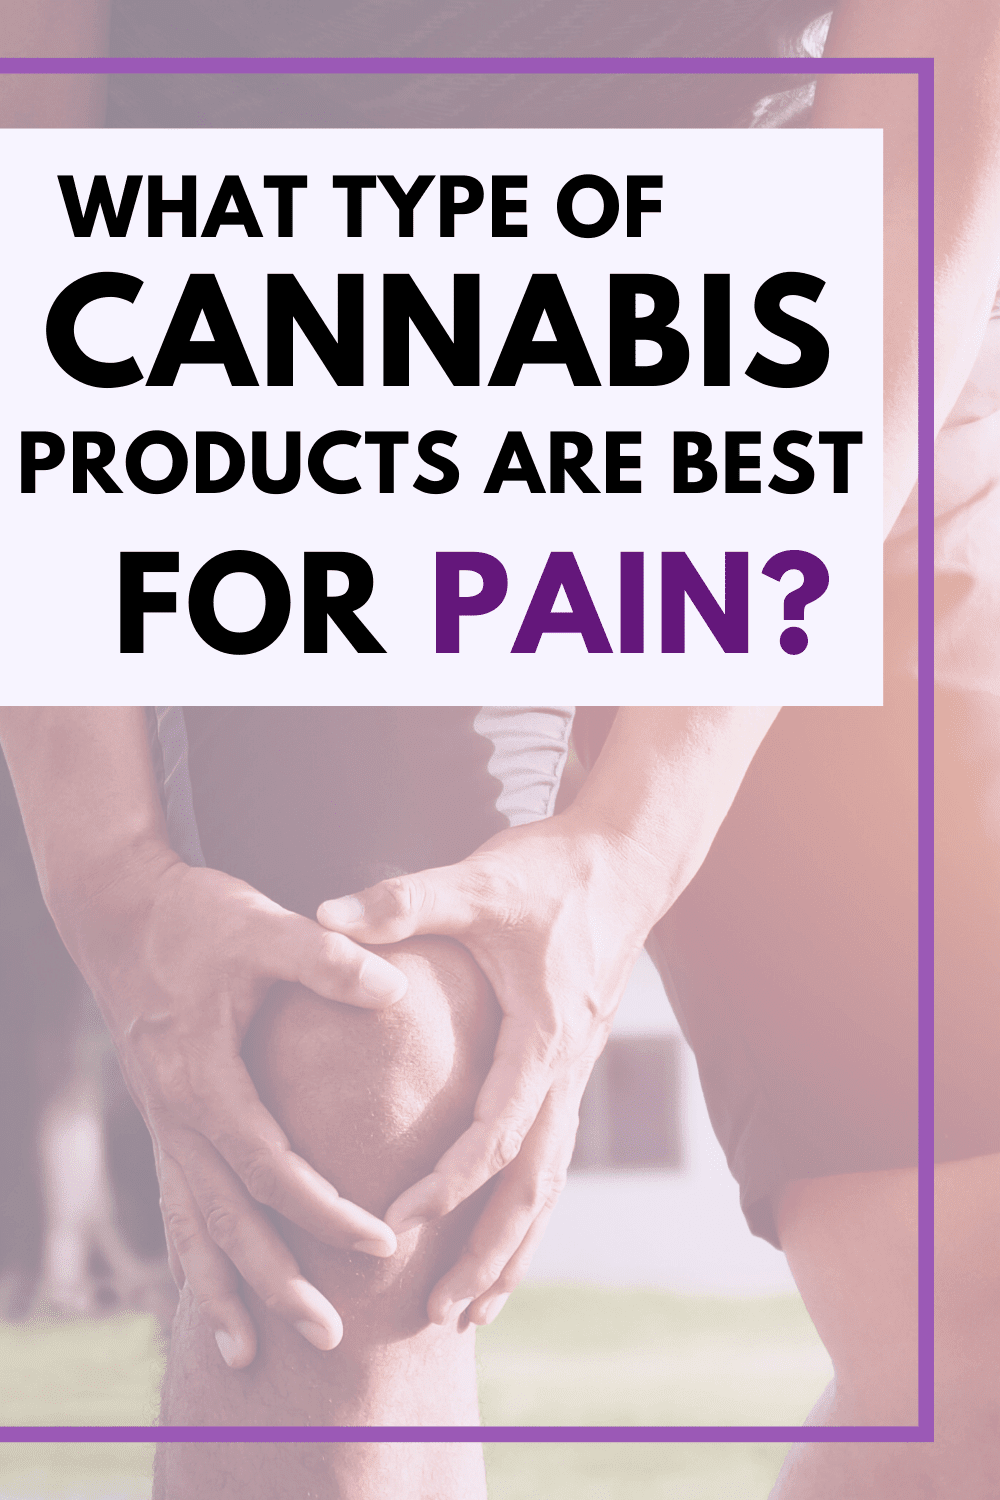 What Types of Cannabis Products Are Best for Pain?